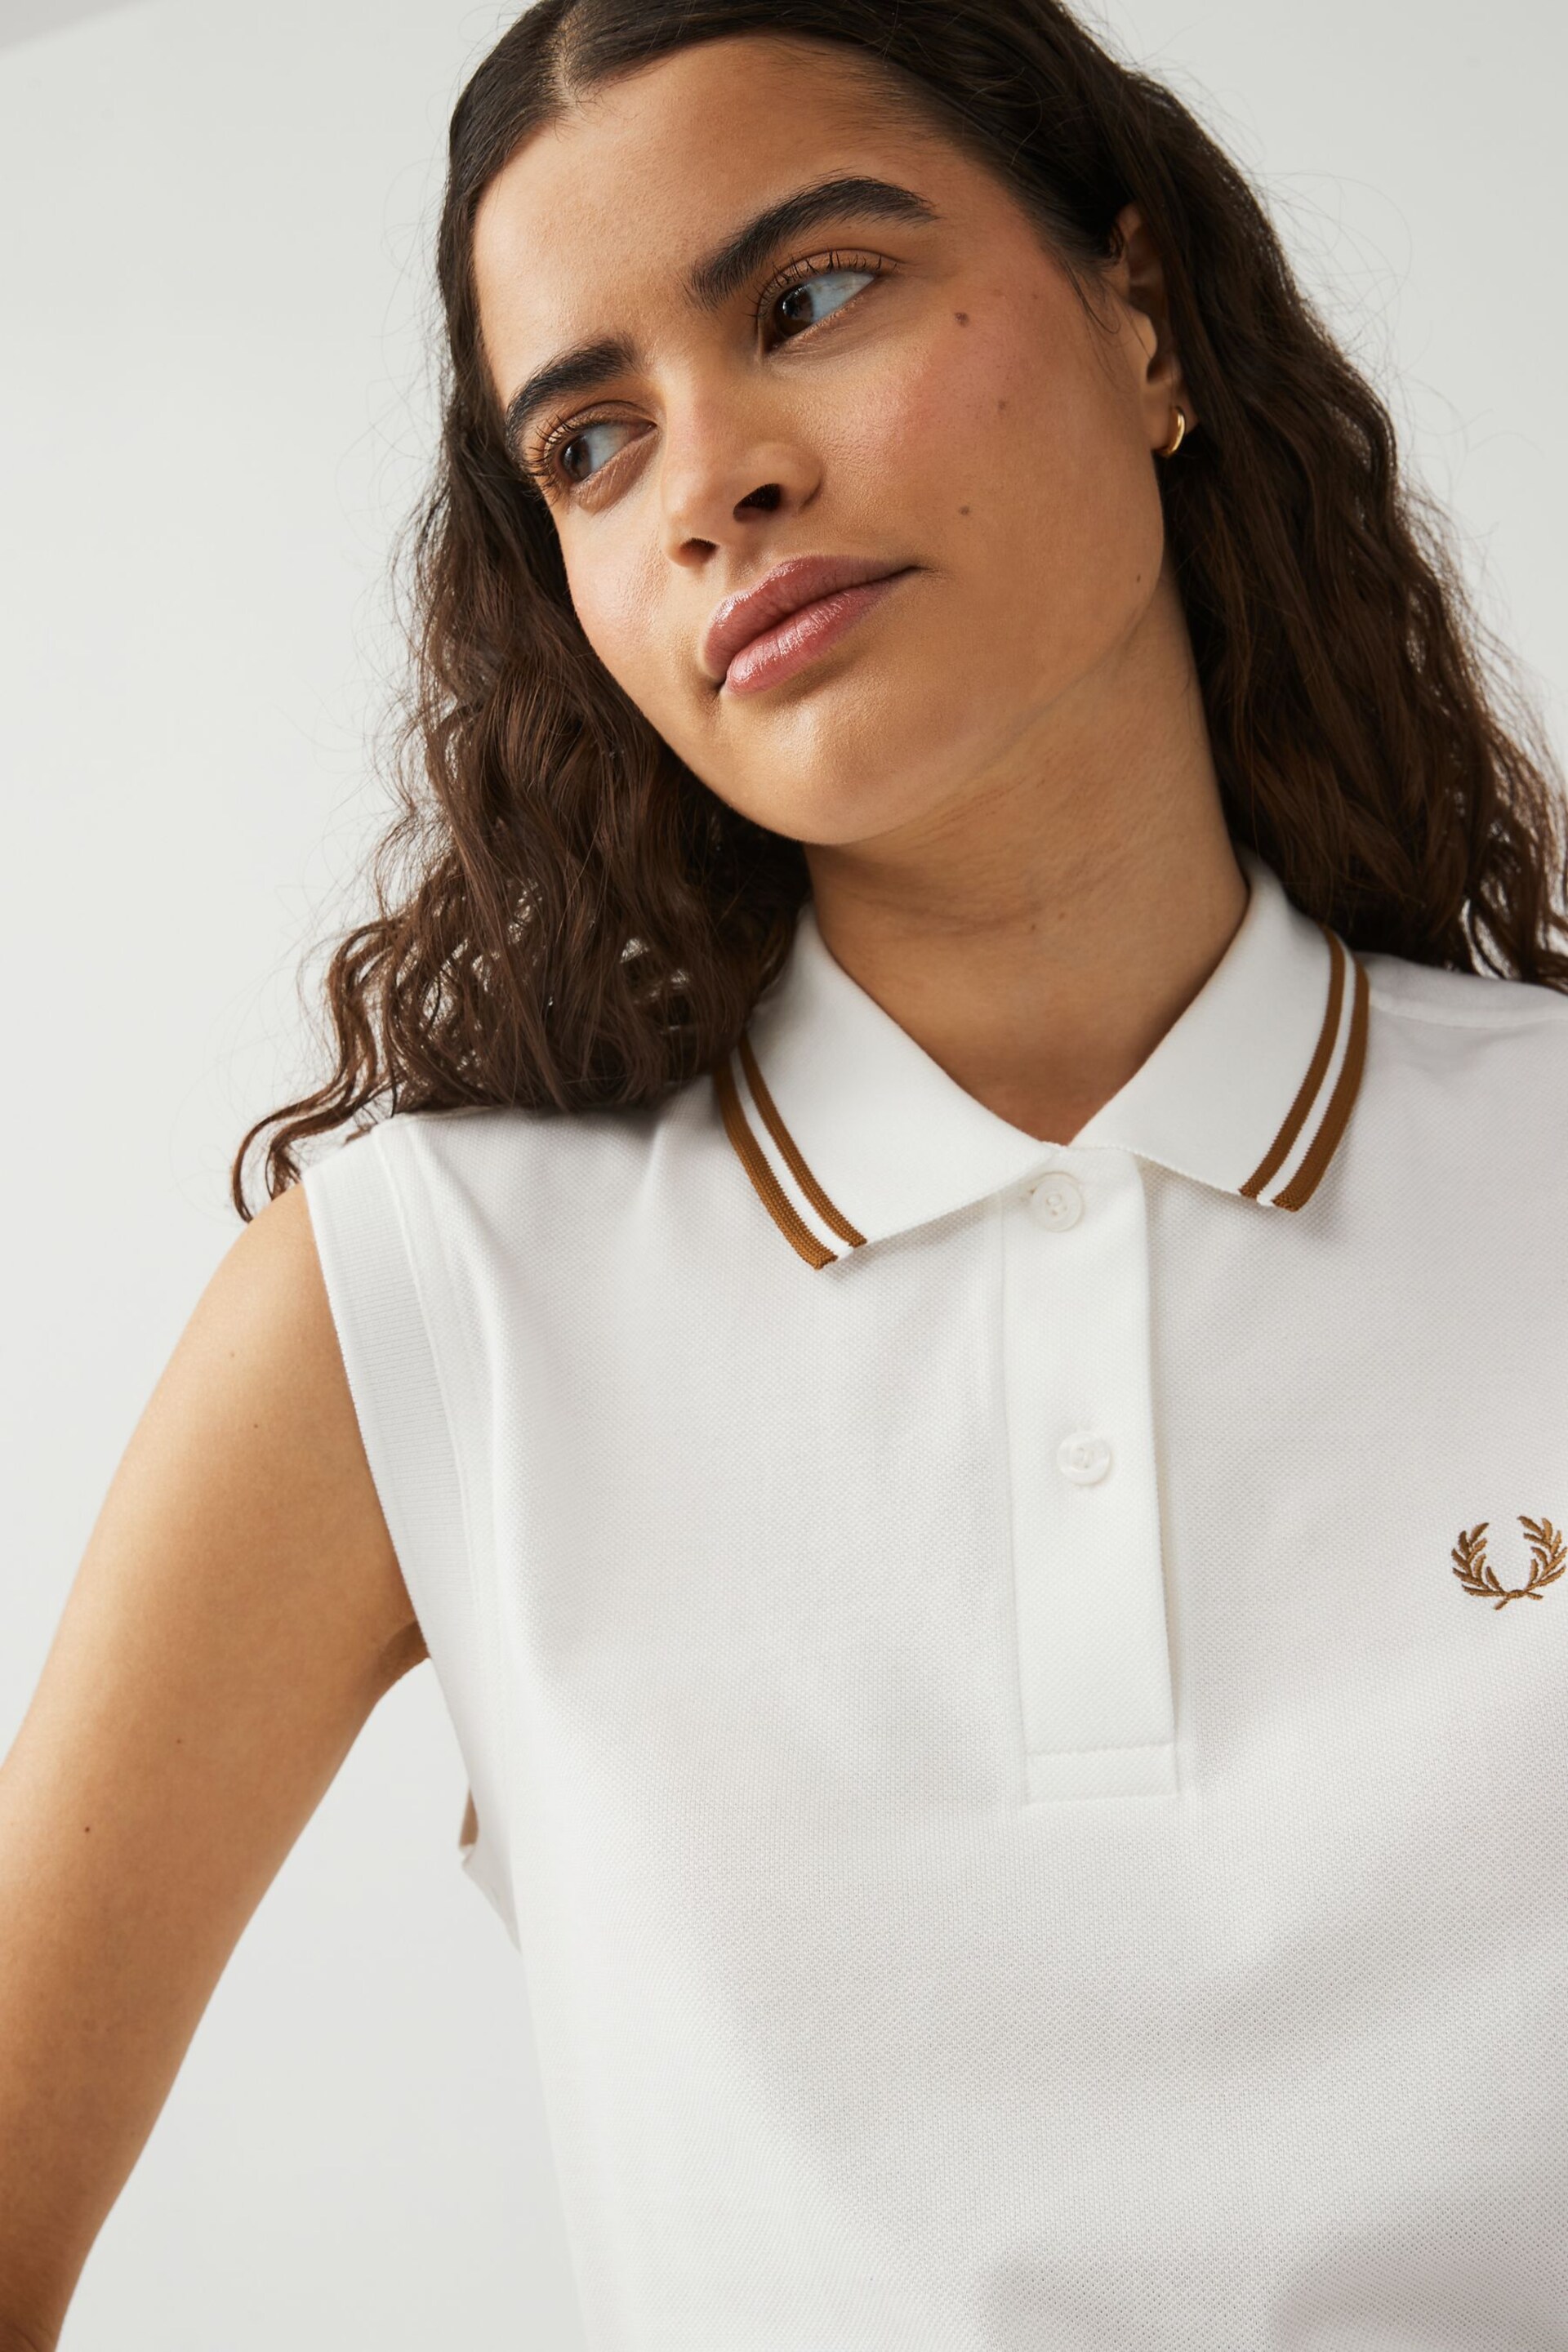 Fred Perry Womens Sleeveless Twin Tipped Polo Shirt - Image 1 of 4